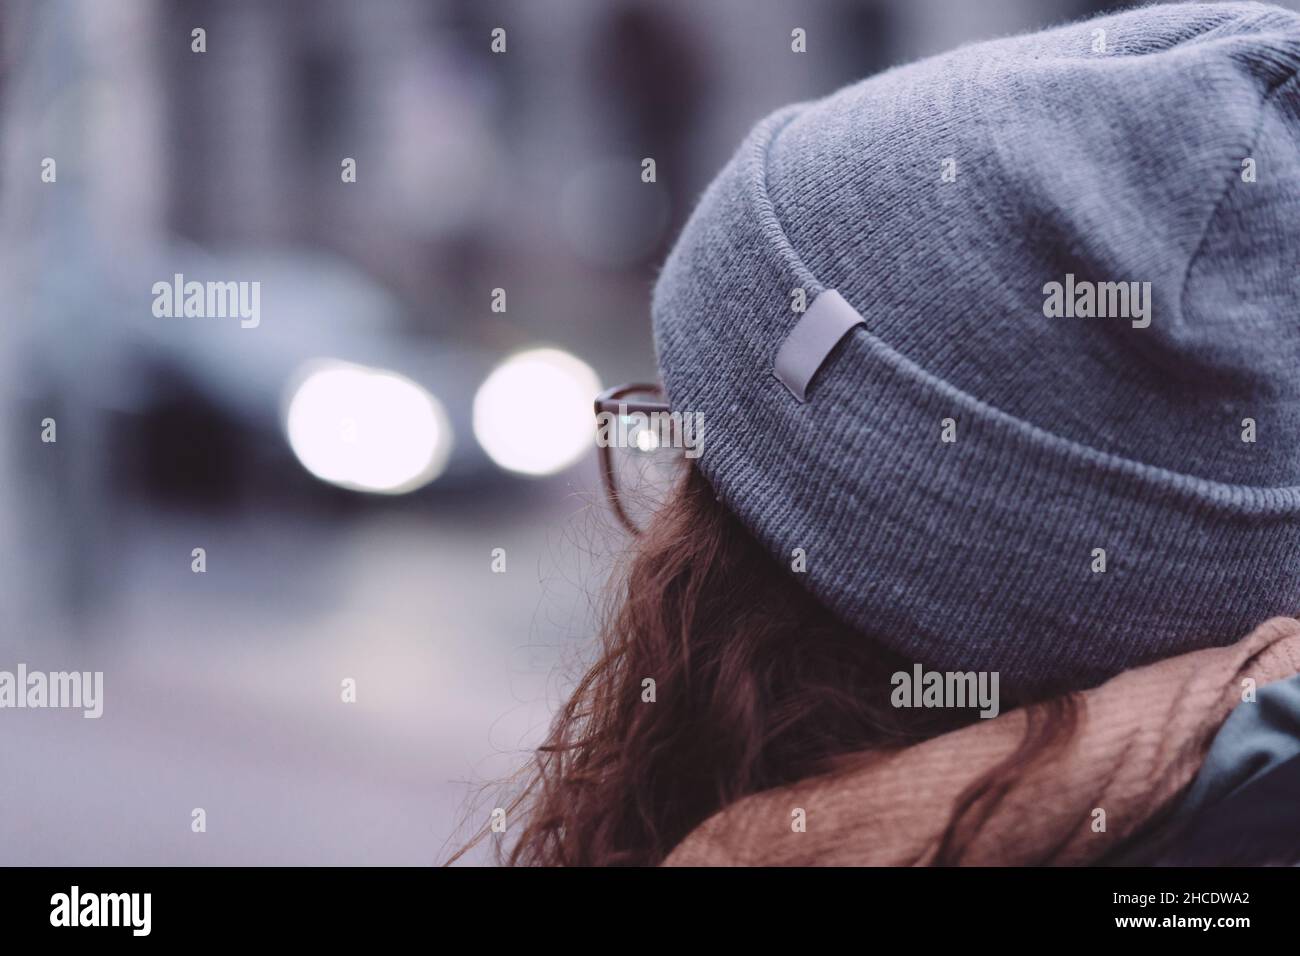 Rear view of a redhead lady wearing glasses, a hat, and a scarf outdoors Stock Photo